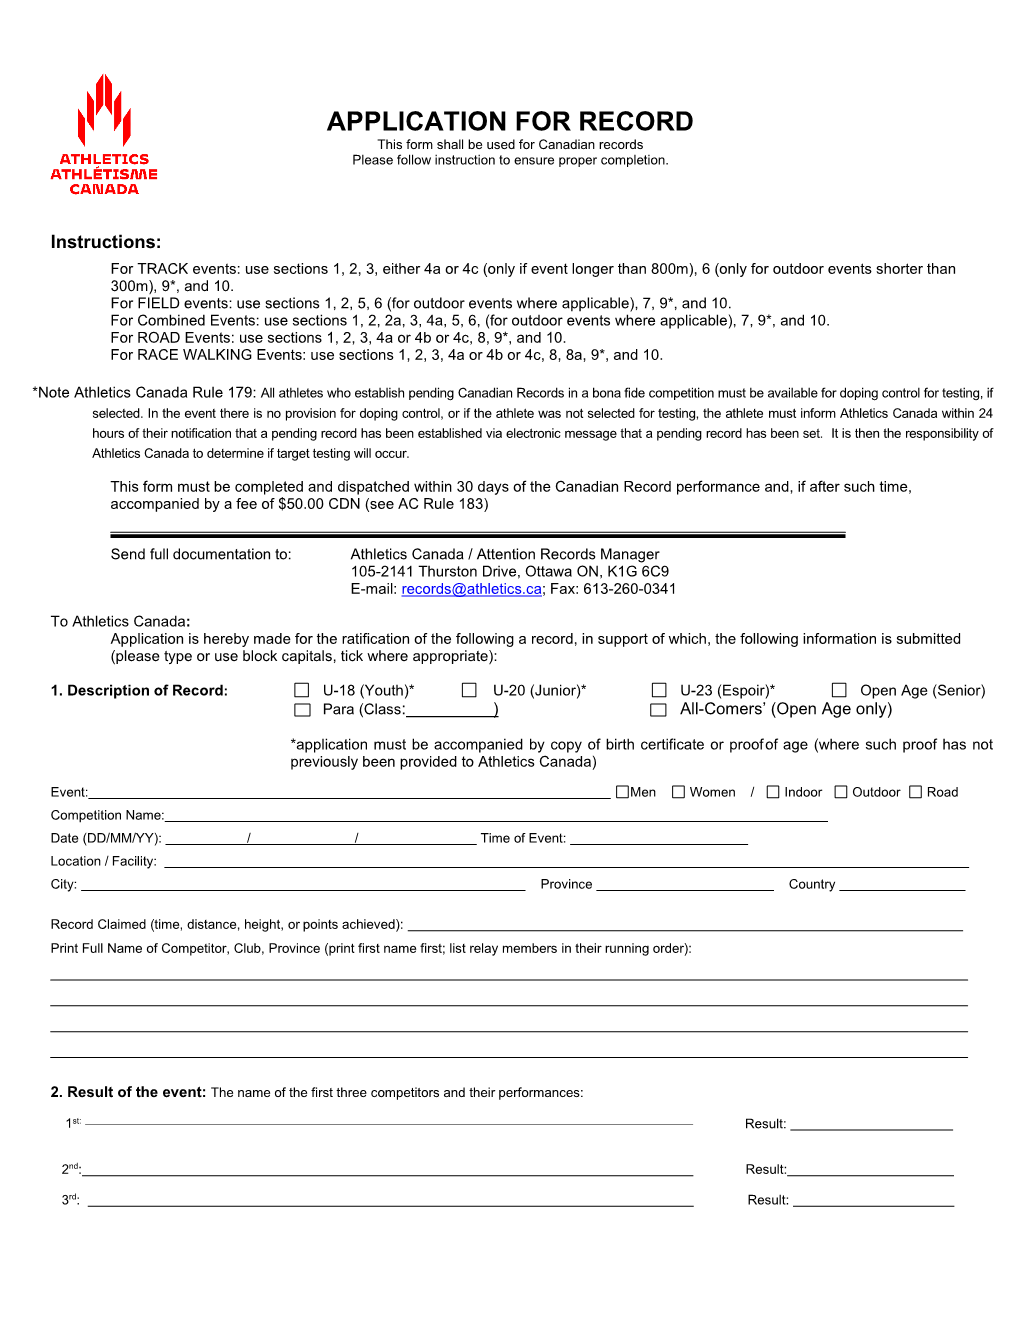 APPLICATION for RECORD This Form Shall Be Used for Canadian Records Please Follow Instruction to Ensure Proper Completion